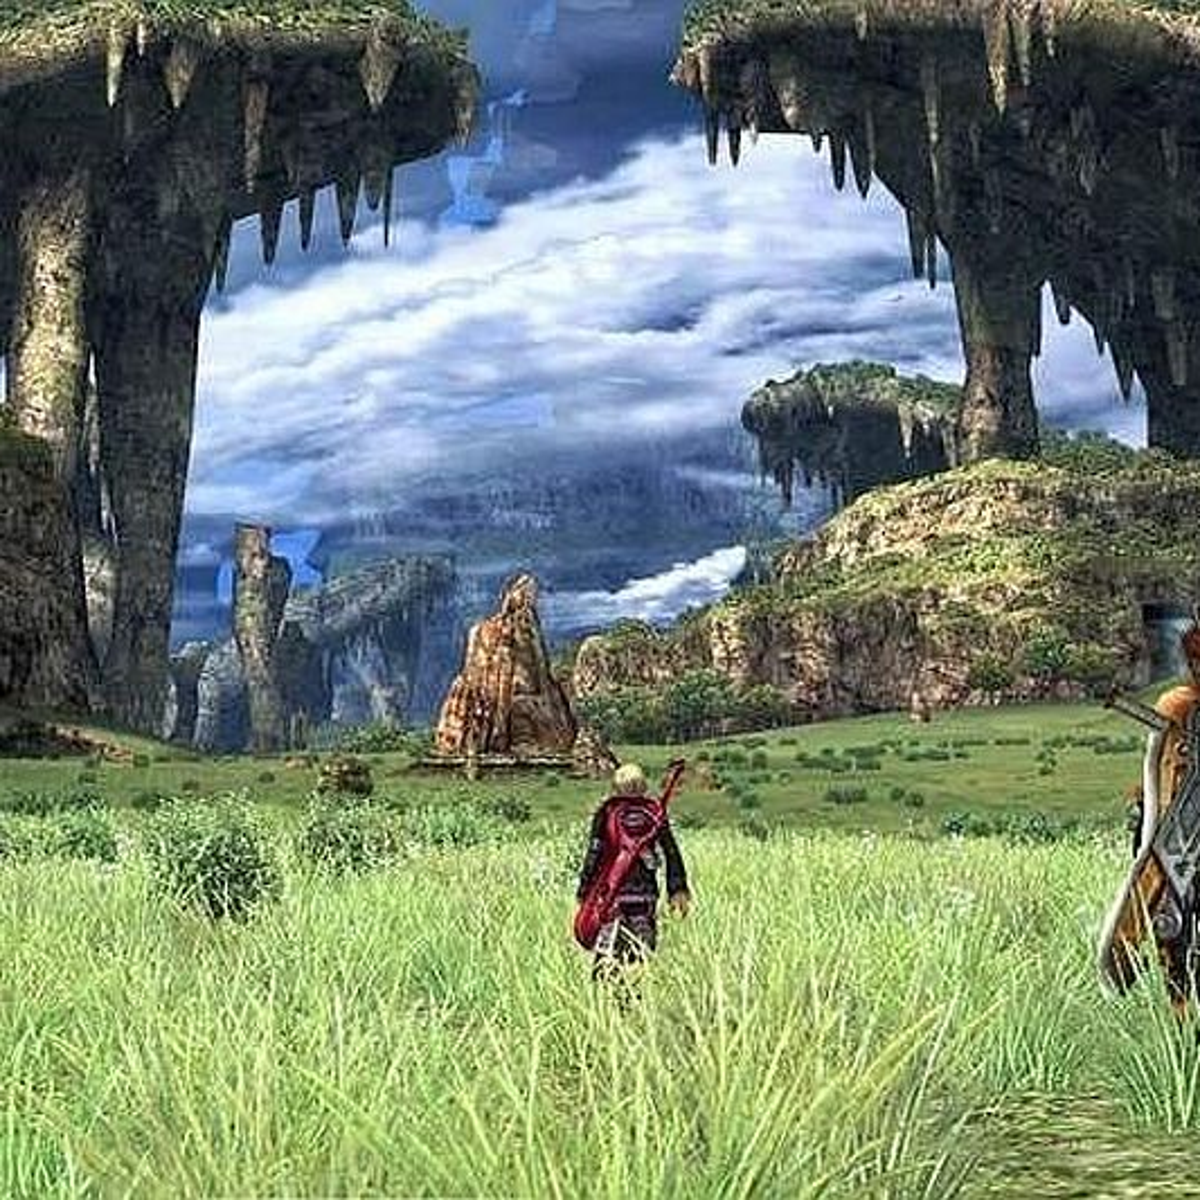 Xenoblade Chronicles 3: Everything we know about the sequel